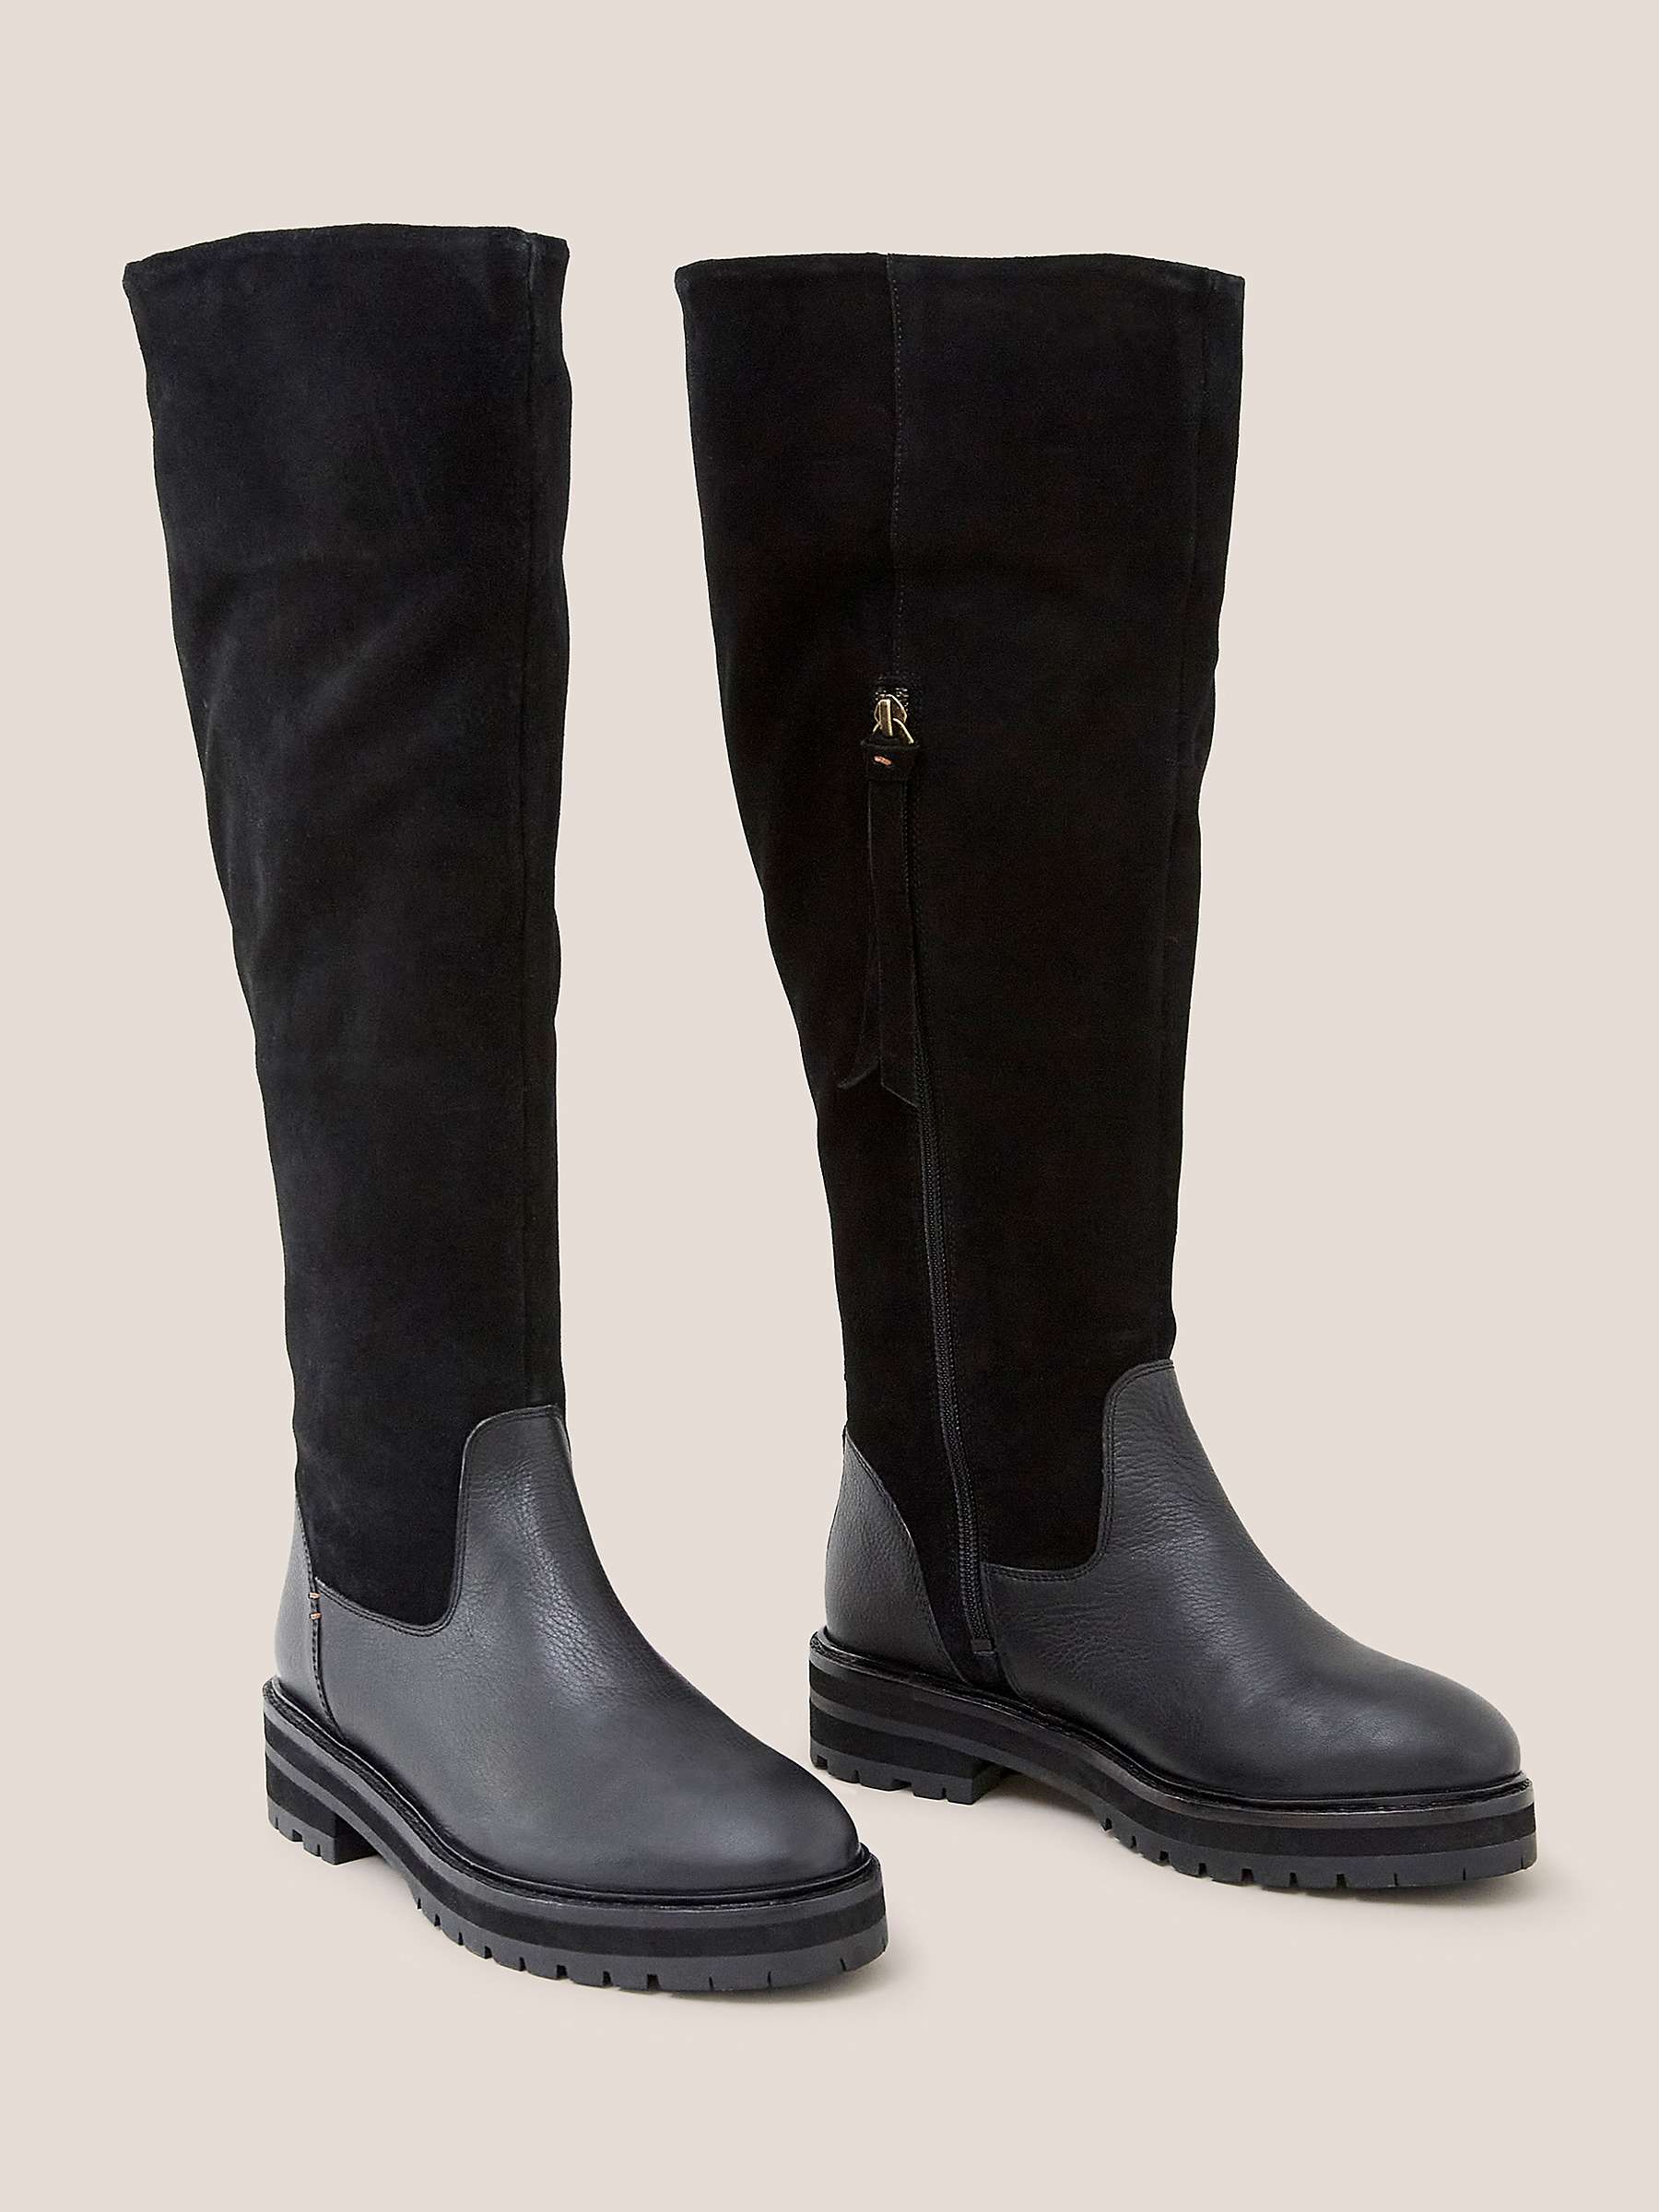 Buy White Stuff Leather Fur Lined Knee High Boots, Black Online at johnlewis.com